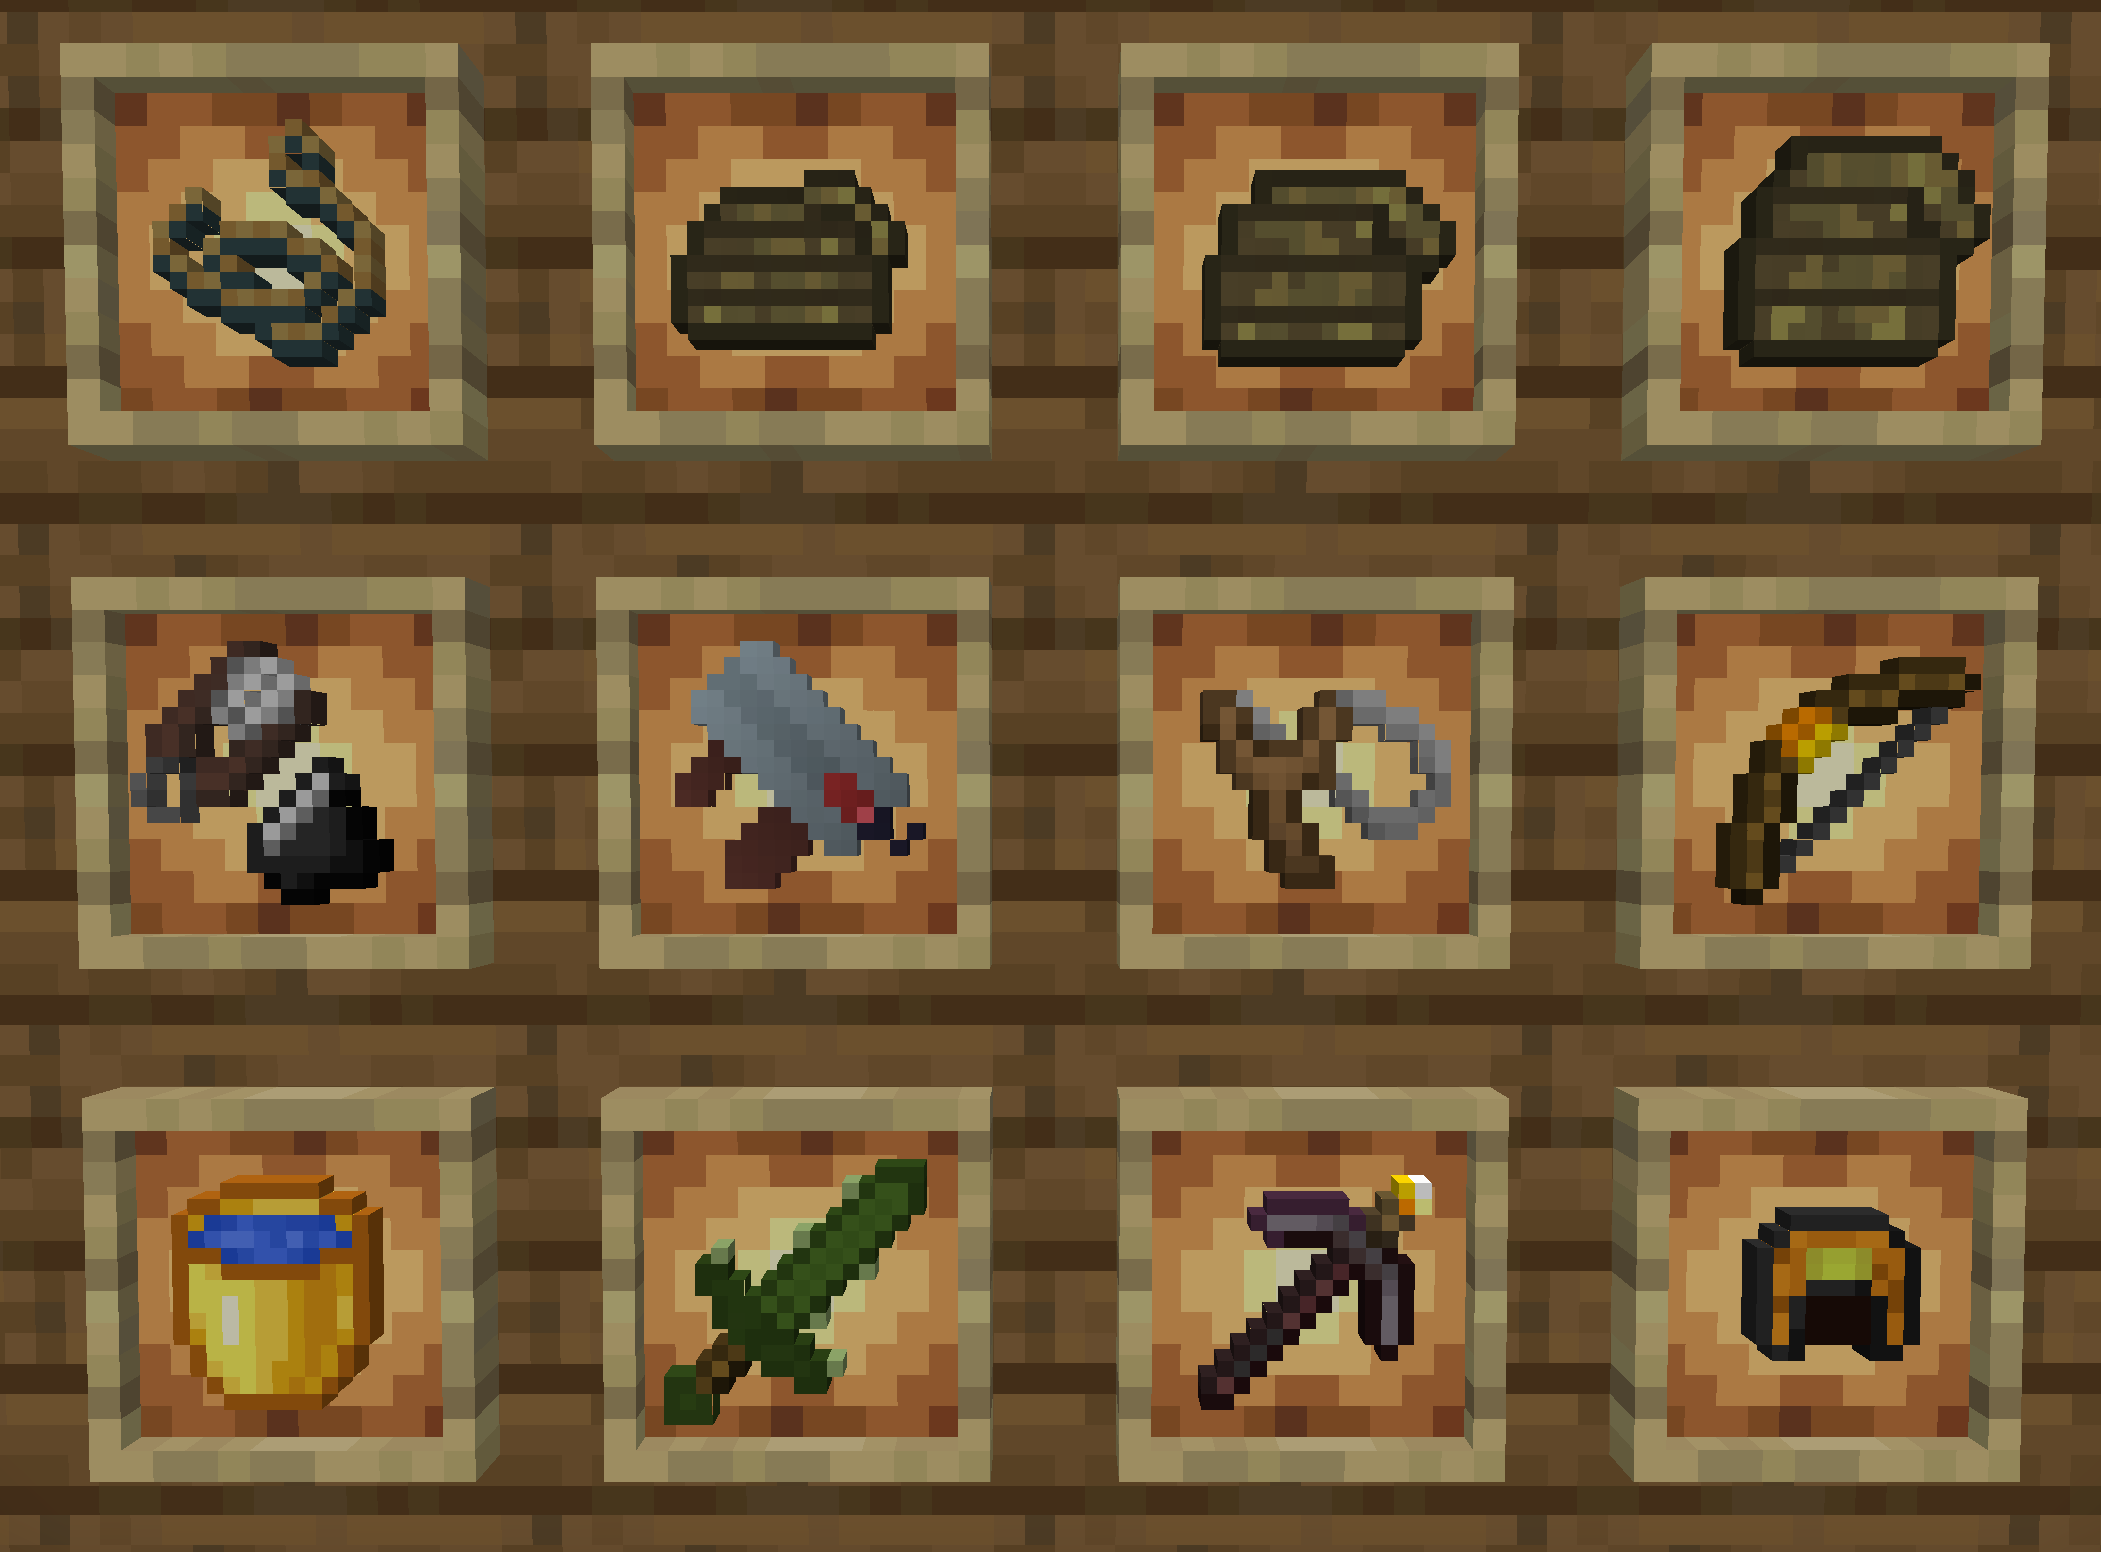 This does not include every item in the mod